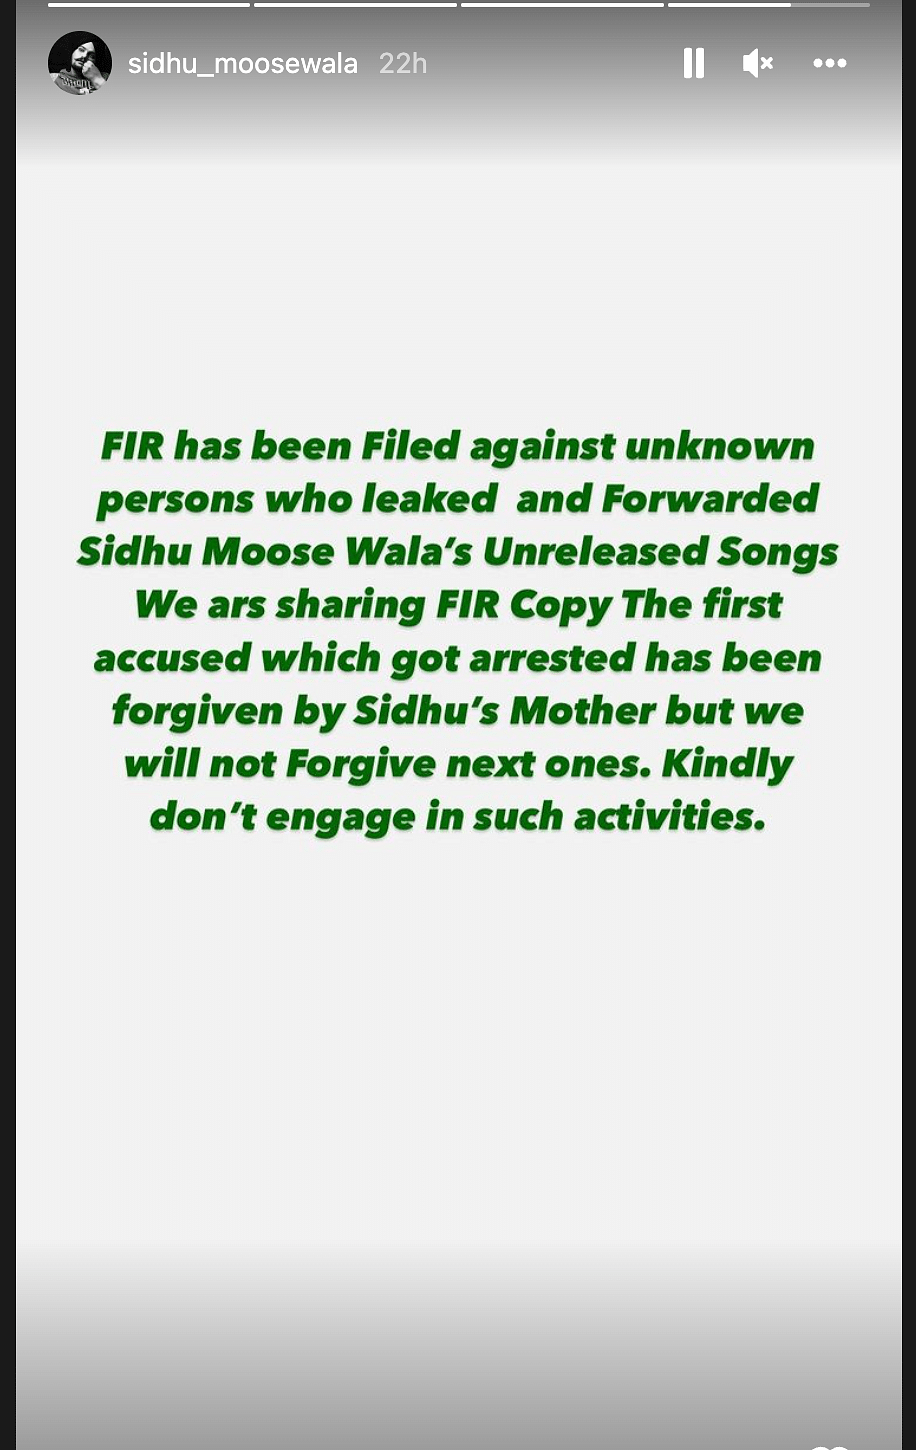 A statement shared on Sidhu's Instagram account said that an FIR has been filed against unknown people.